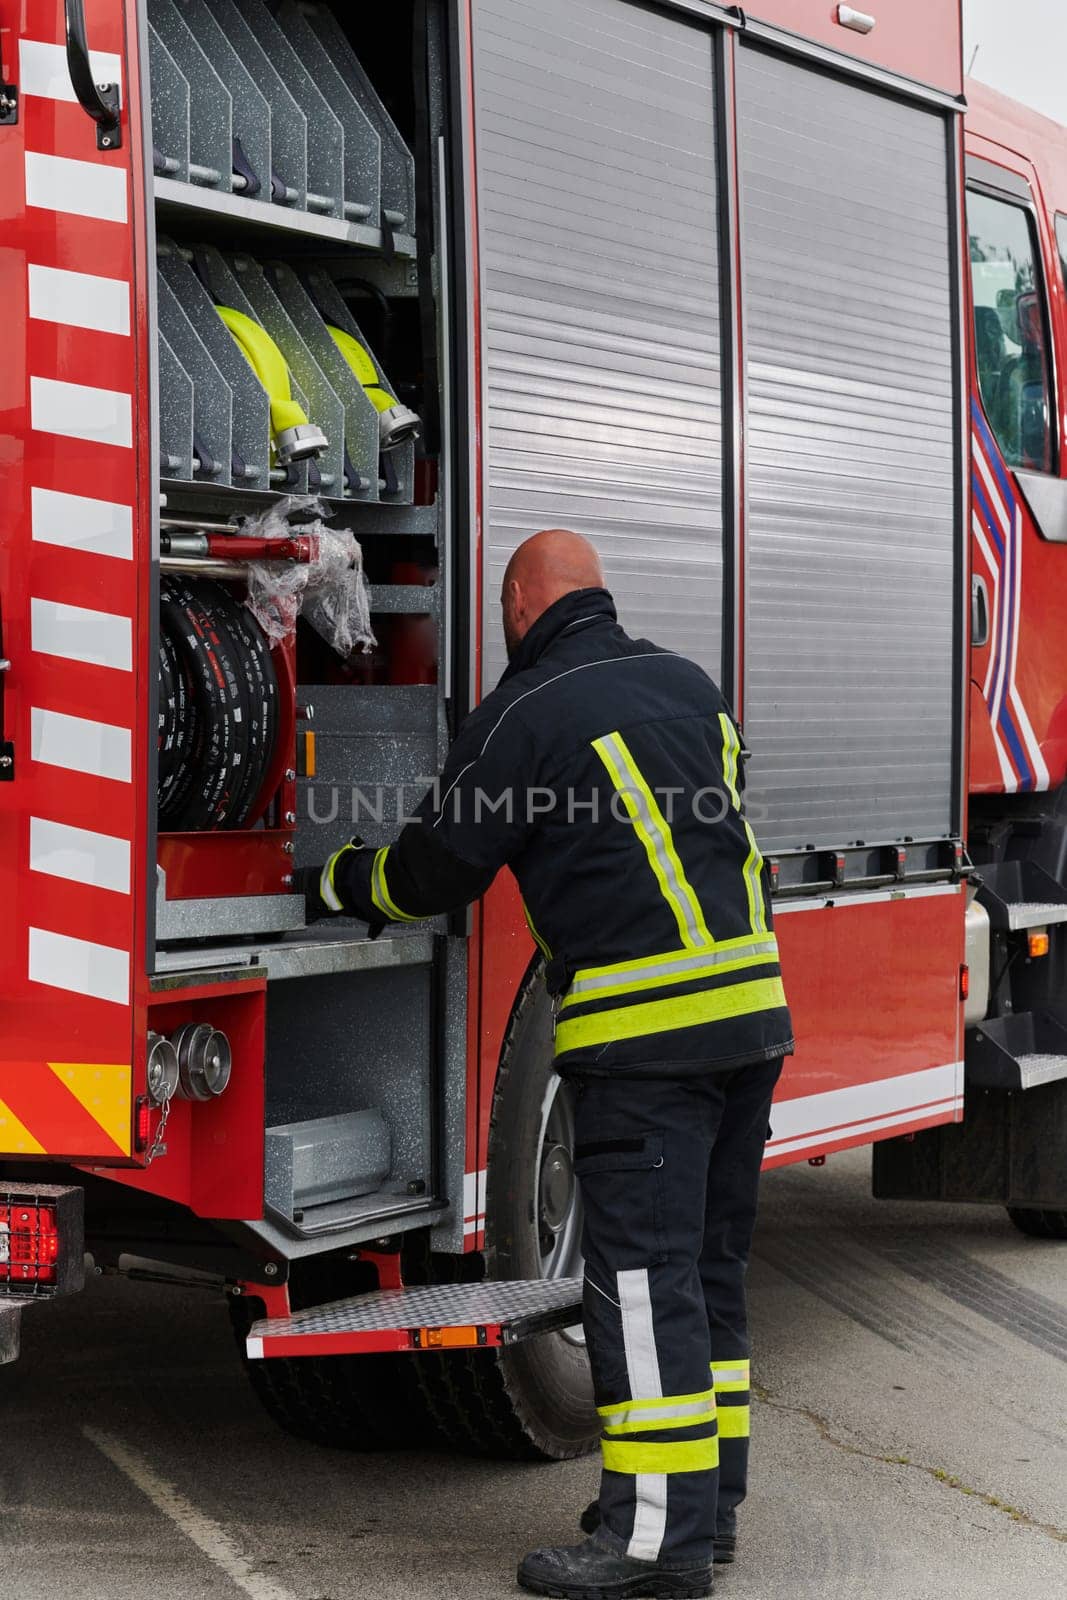 A firefighter meticulously prepares a modern firetruck for a mission to evacuate and respond to dangerous situations, showcasing the utmost dedication to safety and readiness in the face of a fire emergency by dotshock